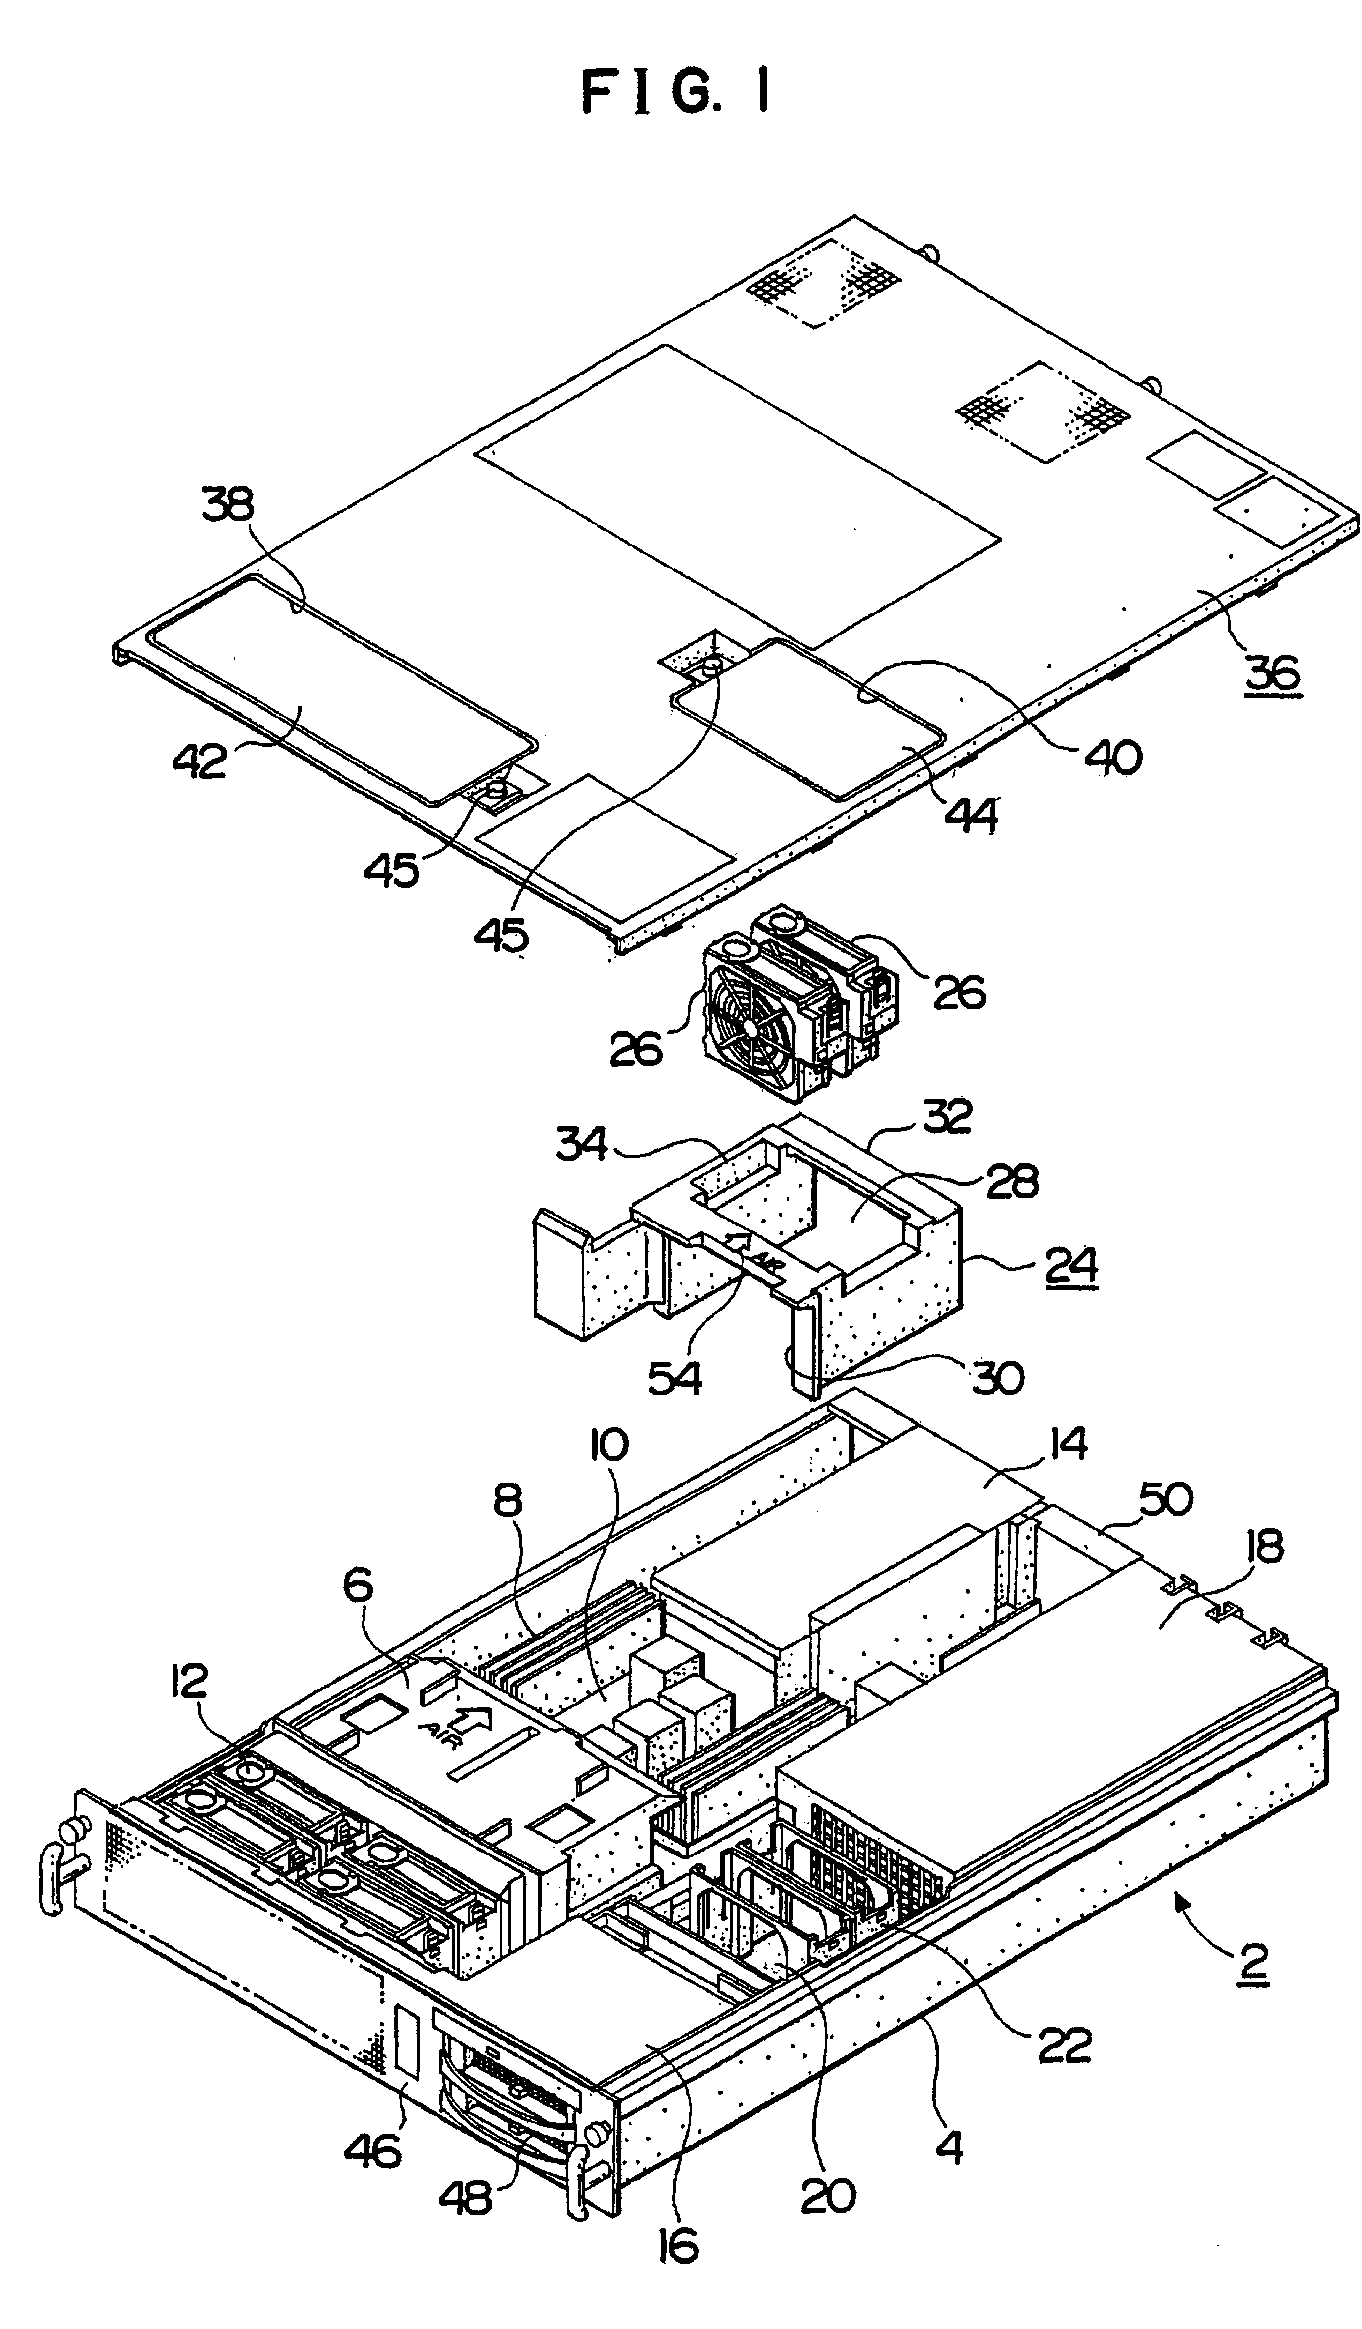 Air duct and electronic equipment using the air duct